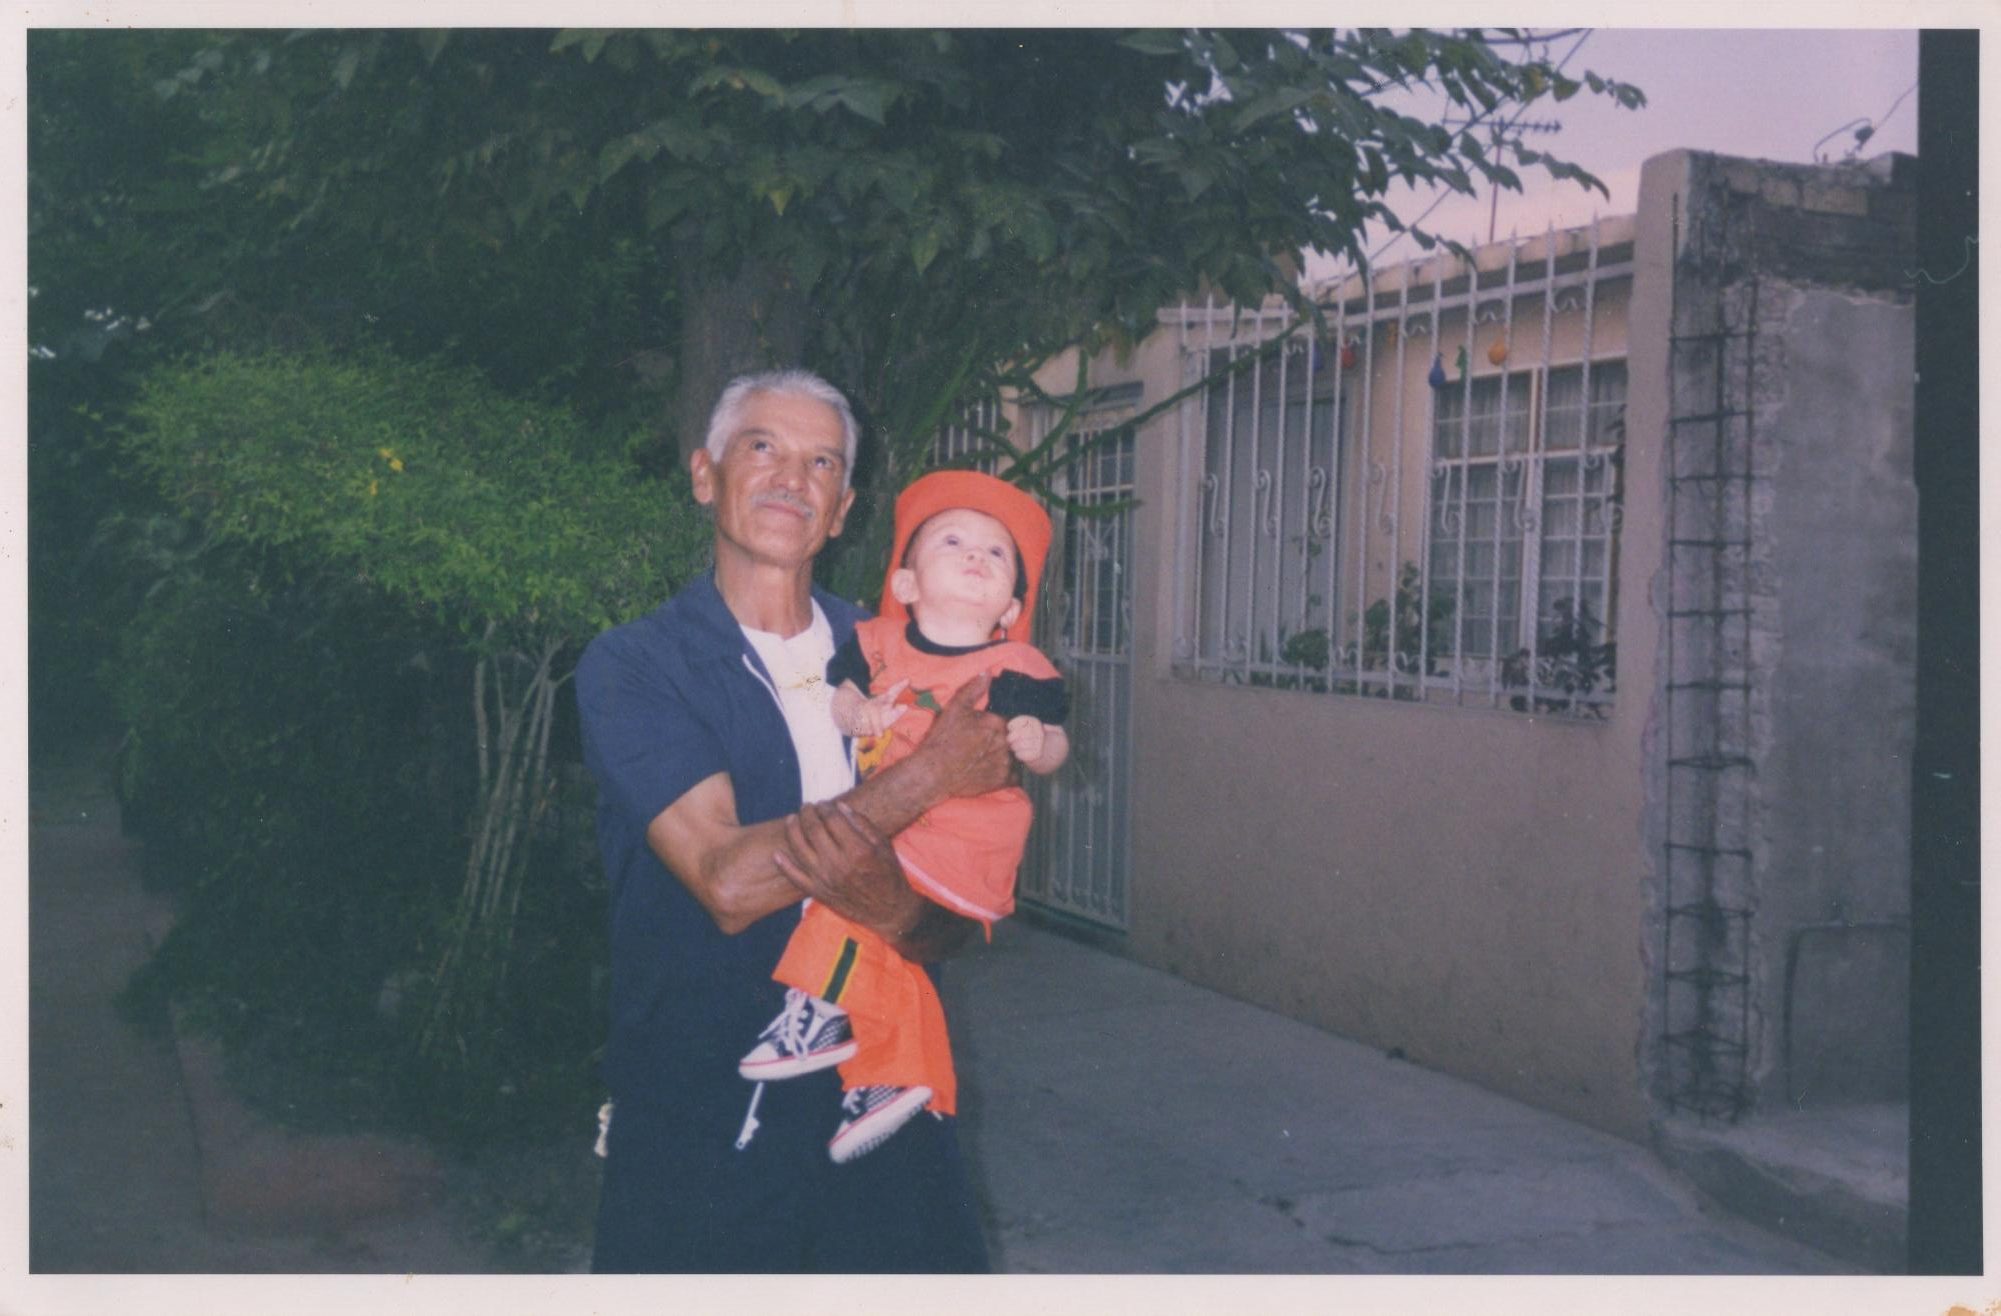 Max Millan’s abuelito, Gonzalo, a native of Toluca, holds him up as a toddler as they look towards an early 2000s Mexico City sky. Along with his wife, Millan’s abuelita Teresa, Gonzalo remains a fixture in his grandsons memories. From suffering from the vices of alcoholism to evolving into a faithful Christian, Gonzalos life has inspired Millan, even more so now that he’s become his last living grandparent.
